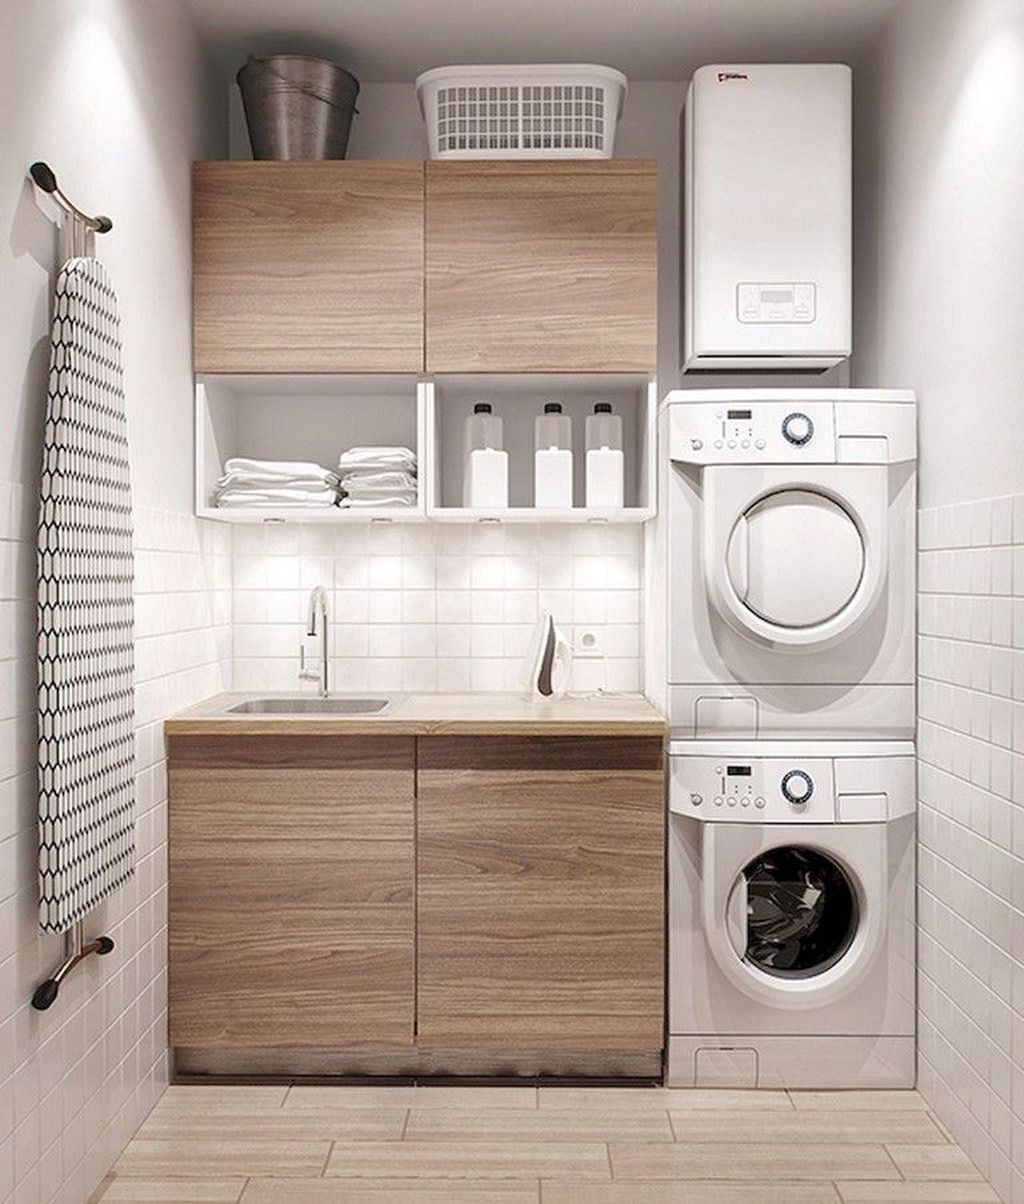 Favored Laundry Room Organization Ideas To Try 13